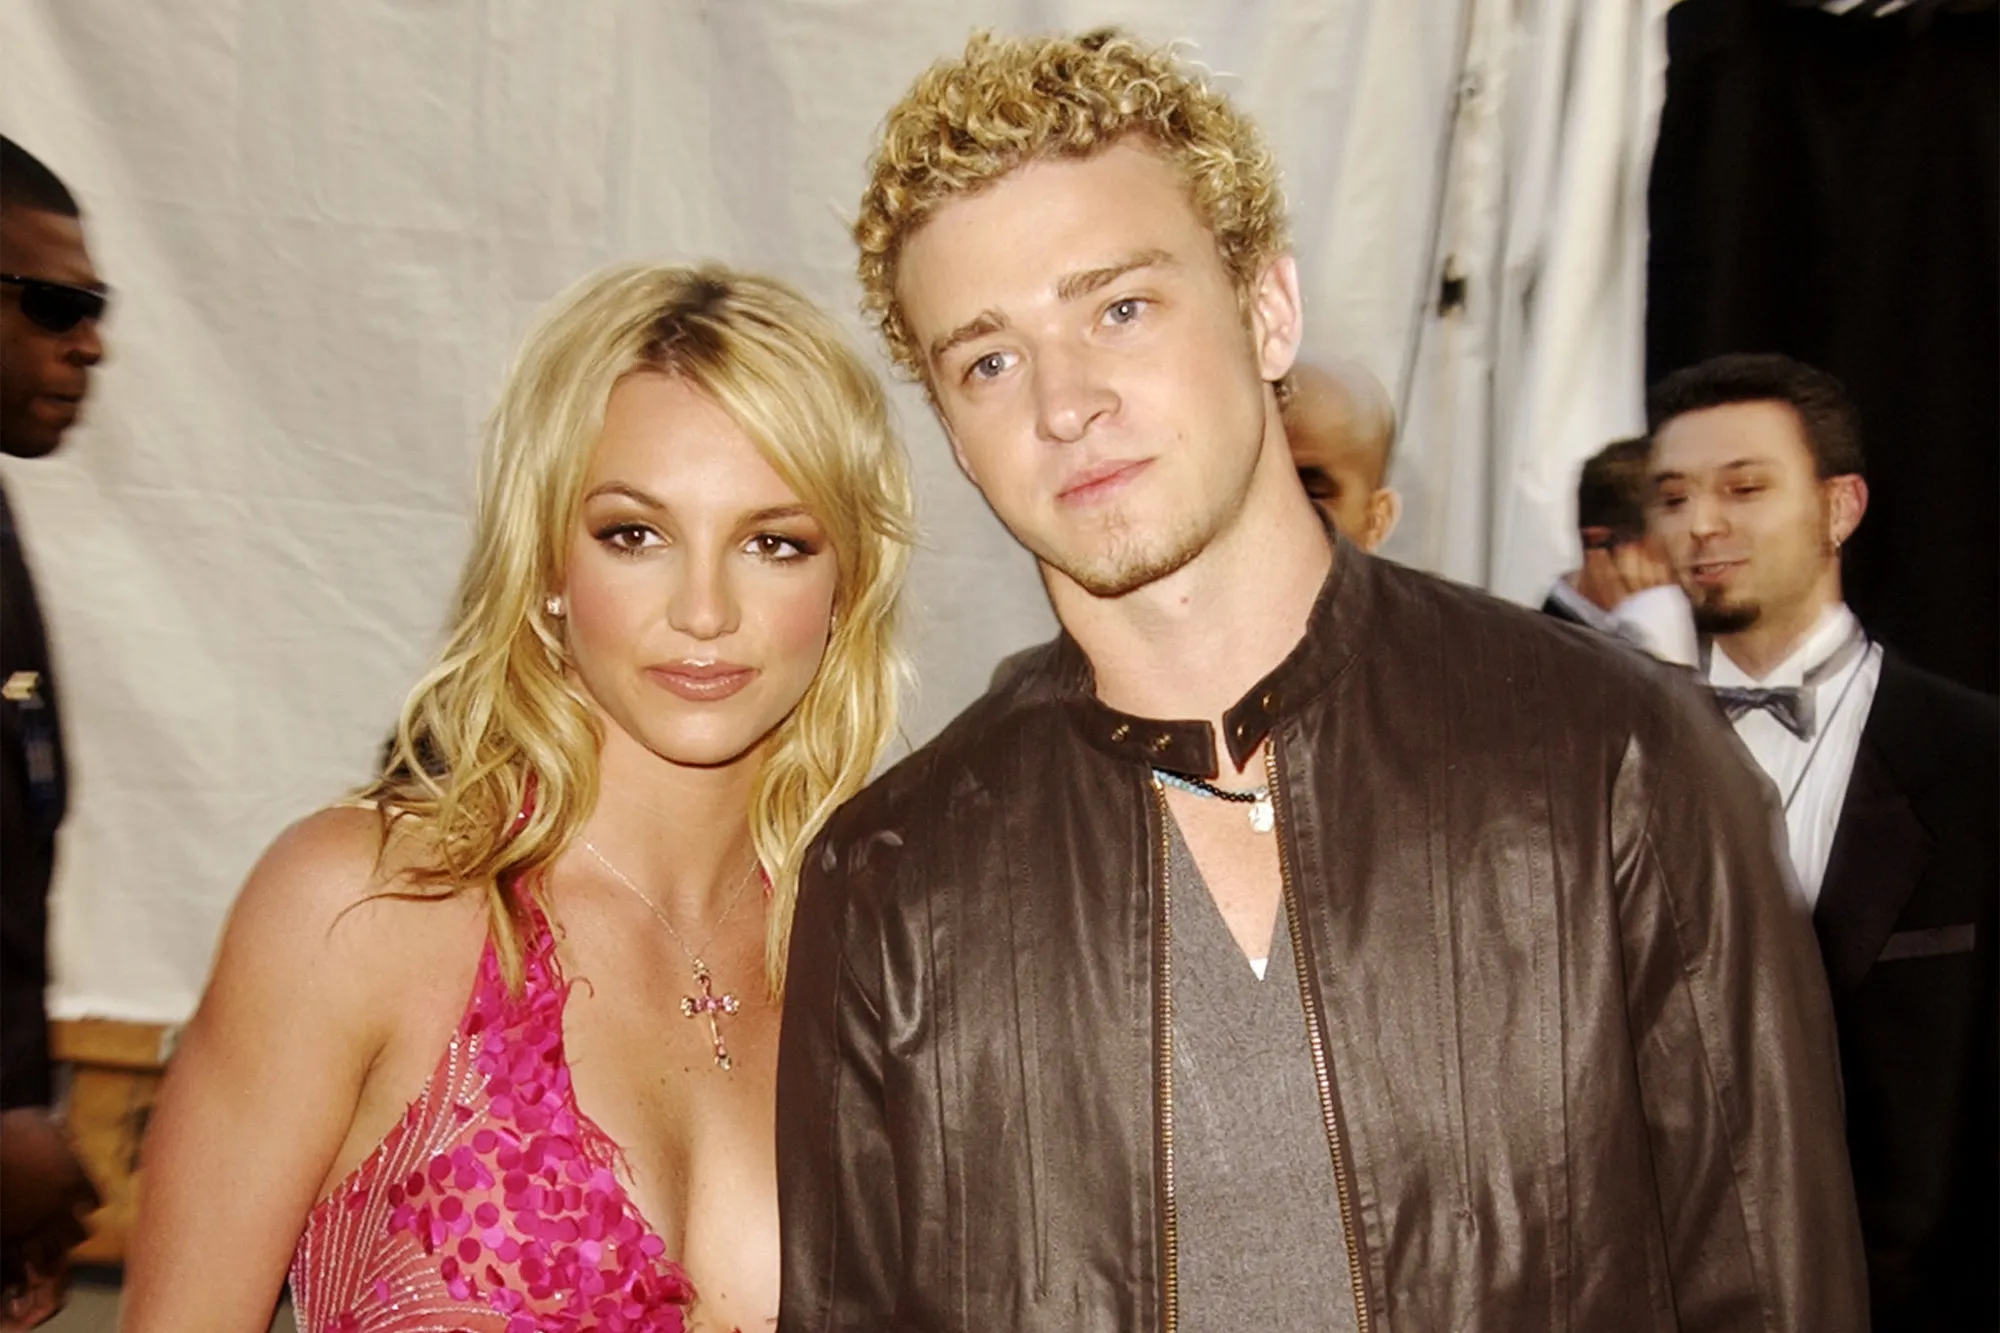 Britney Spears Reveals She Had an Abortion Because Justin Timberlake ‘Didn’t Want to Be a Father’